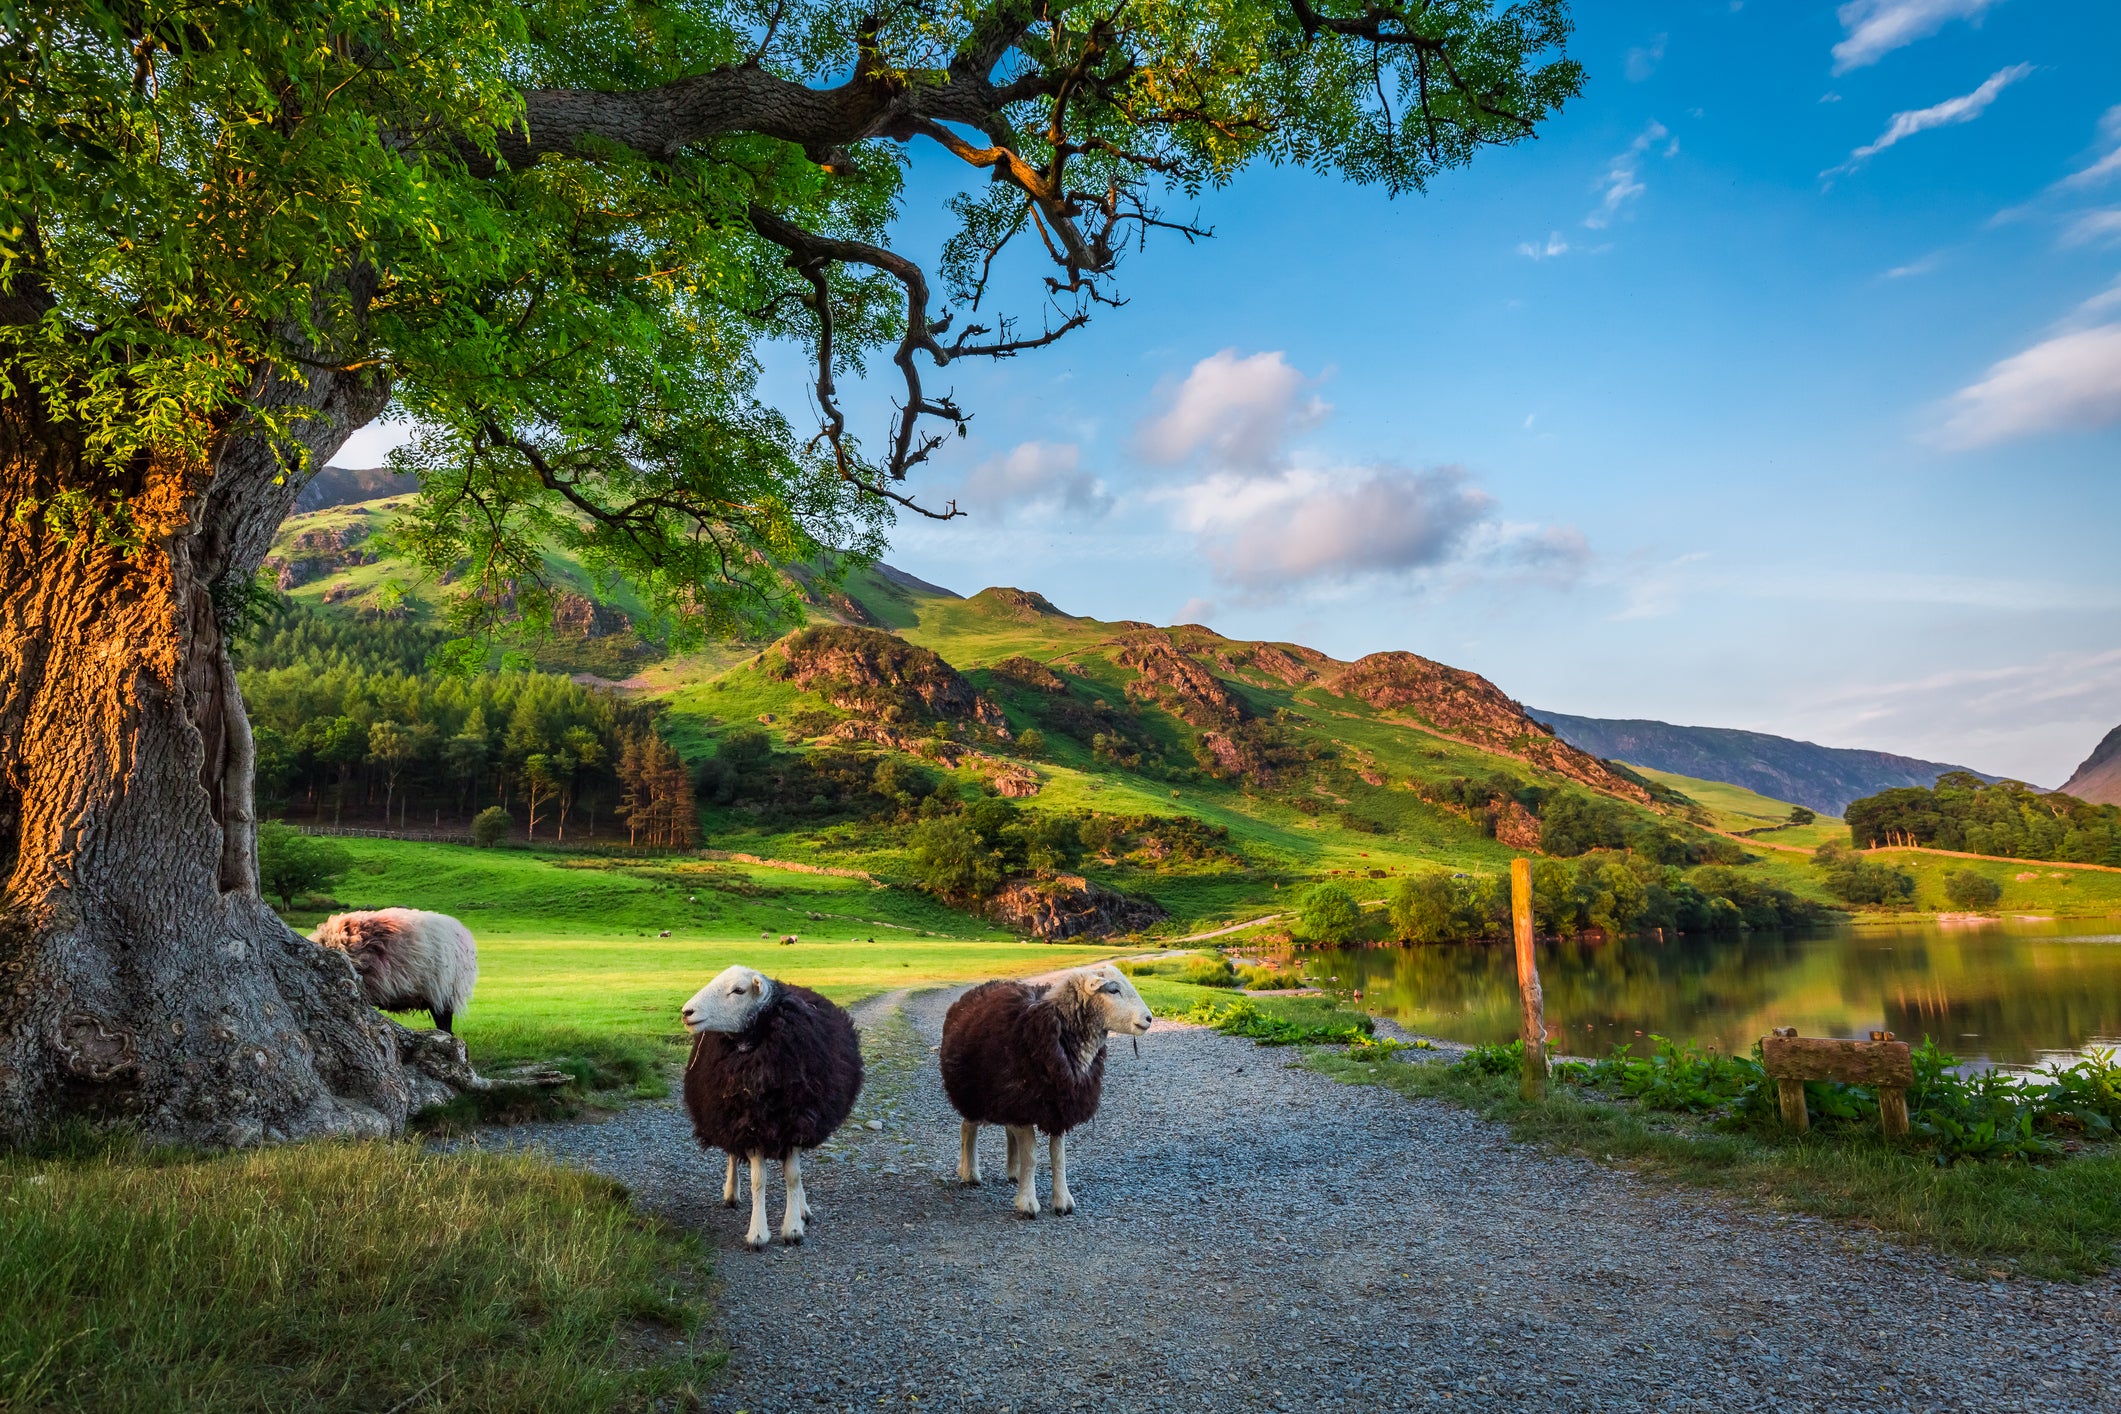 Discover the Lake District National Park by foot